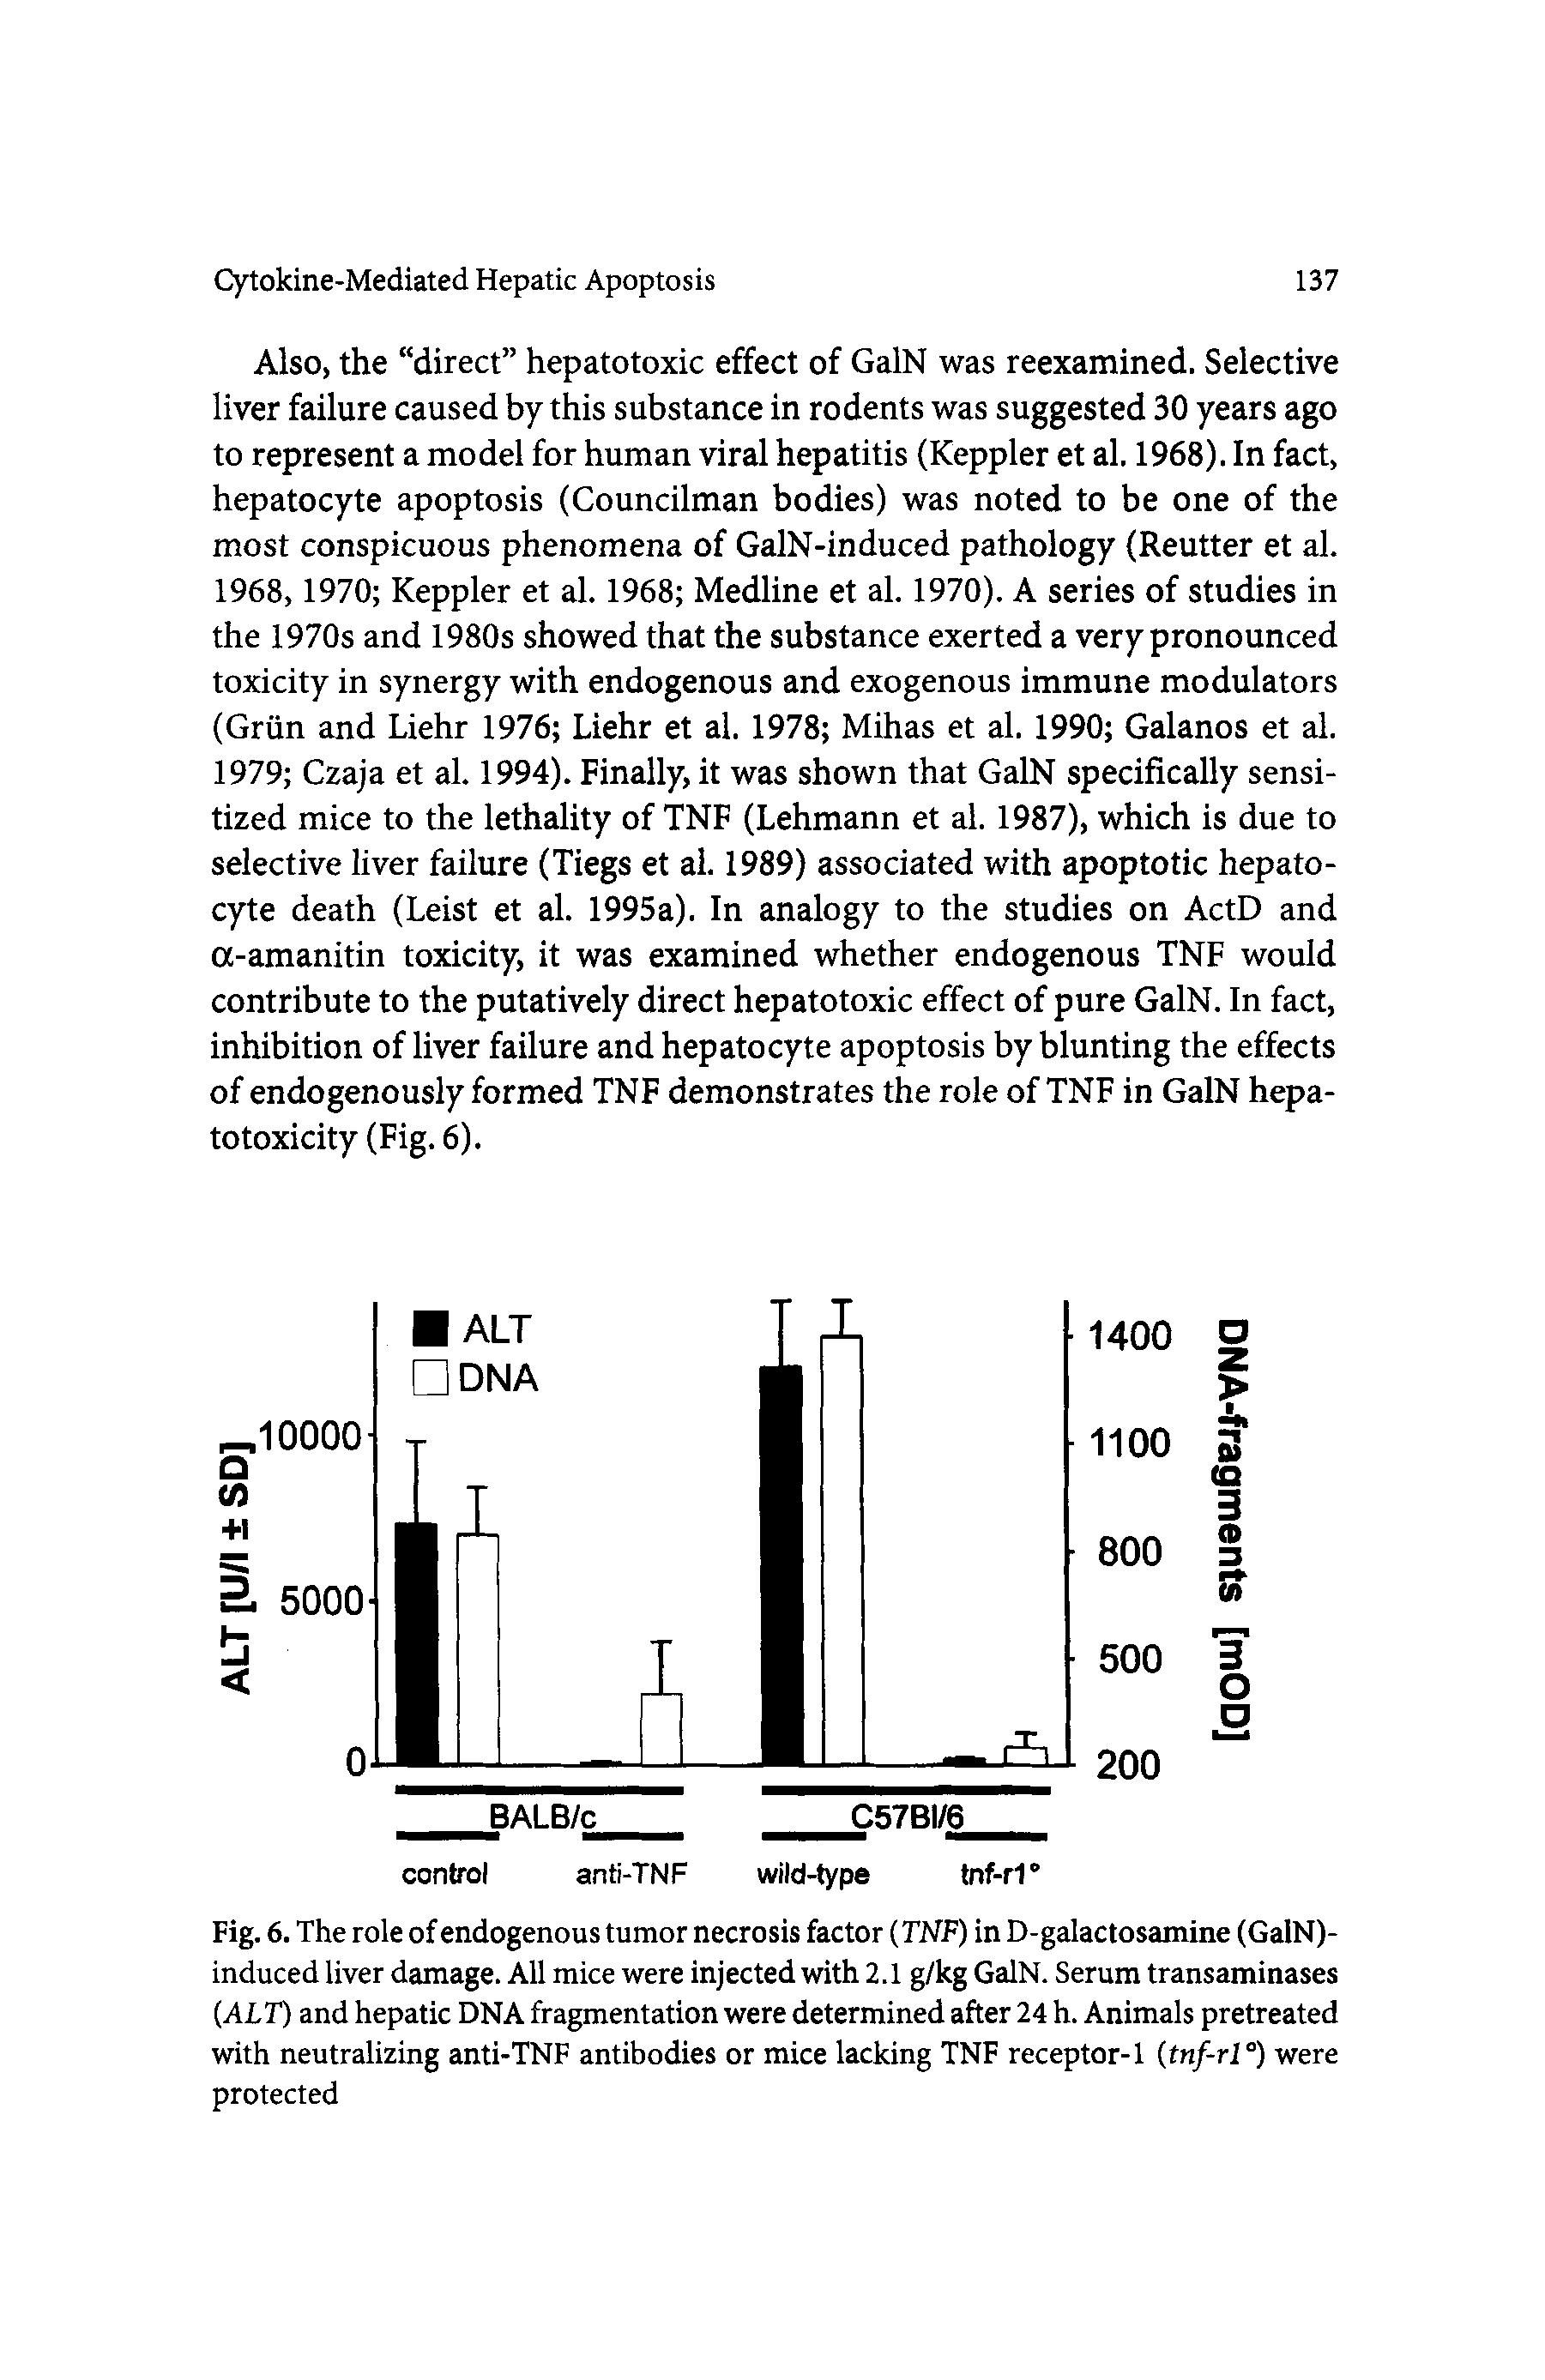 Fig. 6. The role of endogenous tumor necrosis factor TNF) in D-galactosamine (GalN)-induced liver damage. All mice were injected with 2.1 g/kg GalN. Serum transaminases ALT) and hepatic DNA fragmentation were determined after 24 h. Animals pretreated with neutralizing anti-TNF antibodies or mice lacking TNF receptor-1 tnf-rl°) were protected...